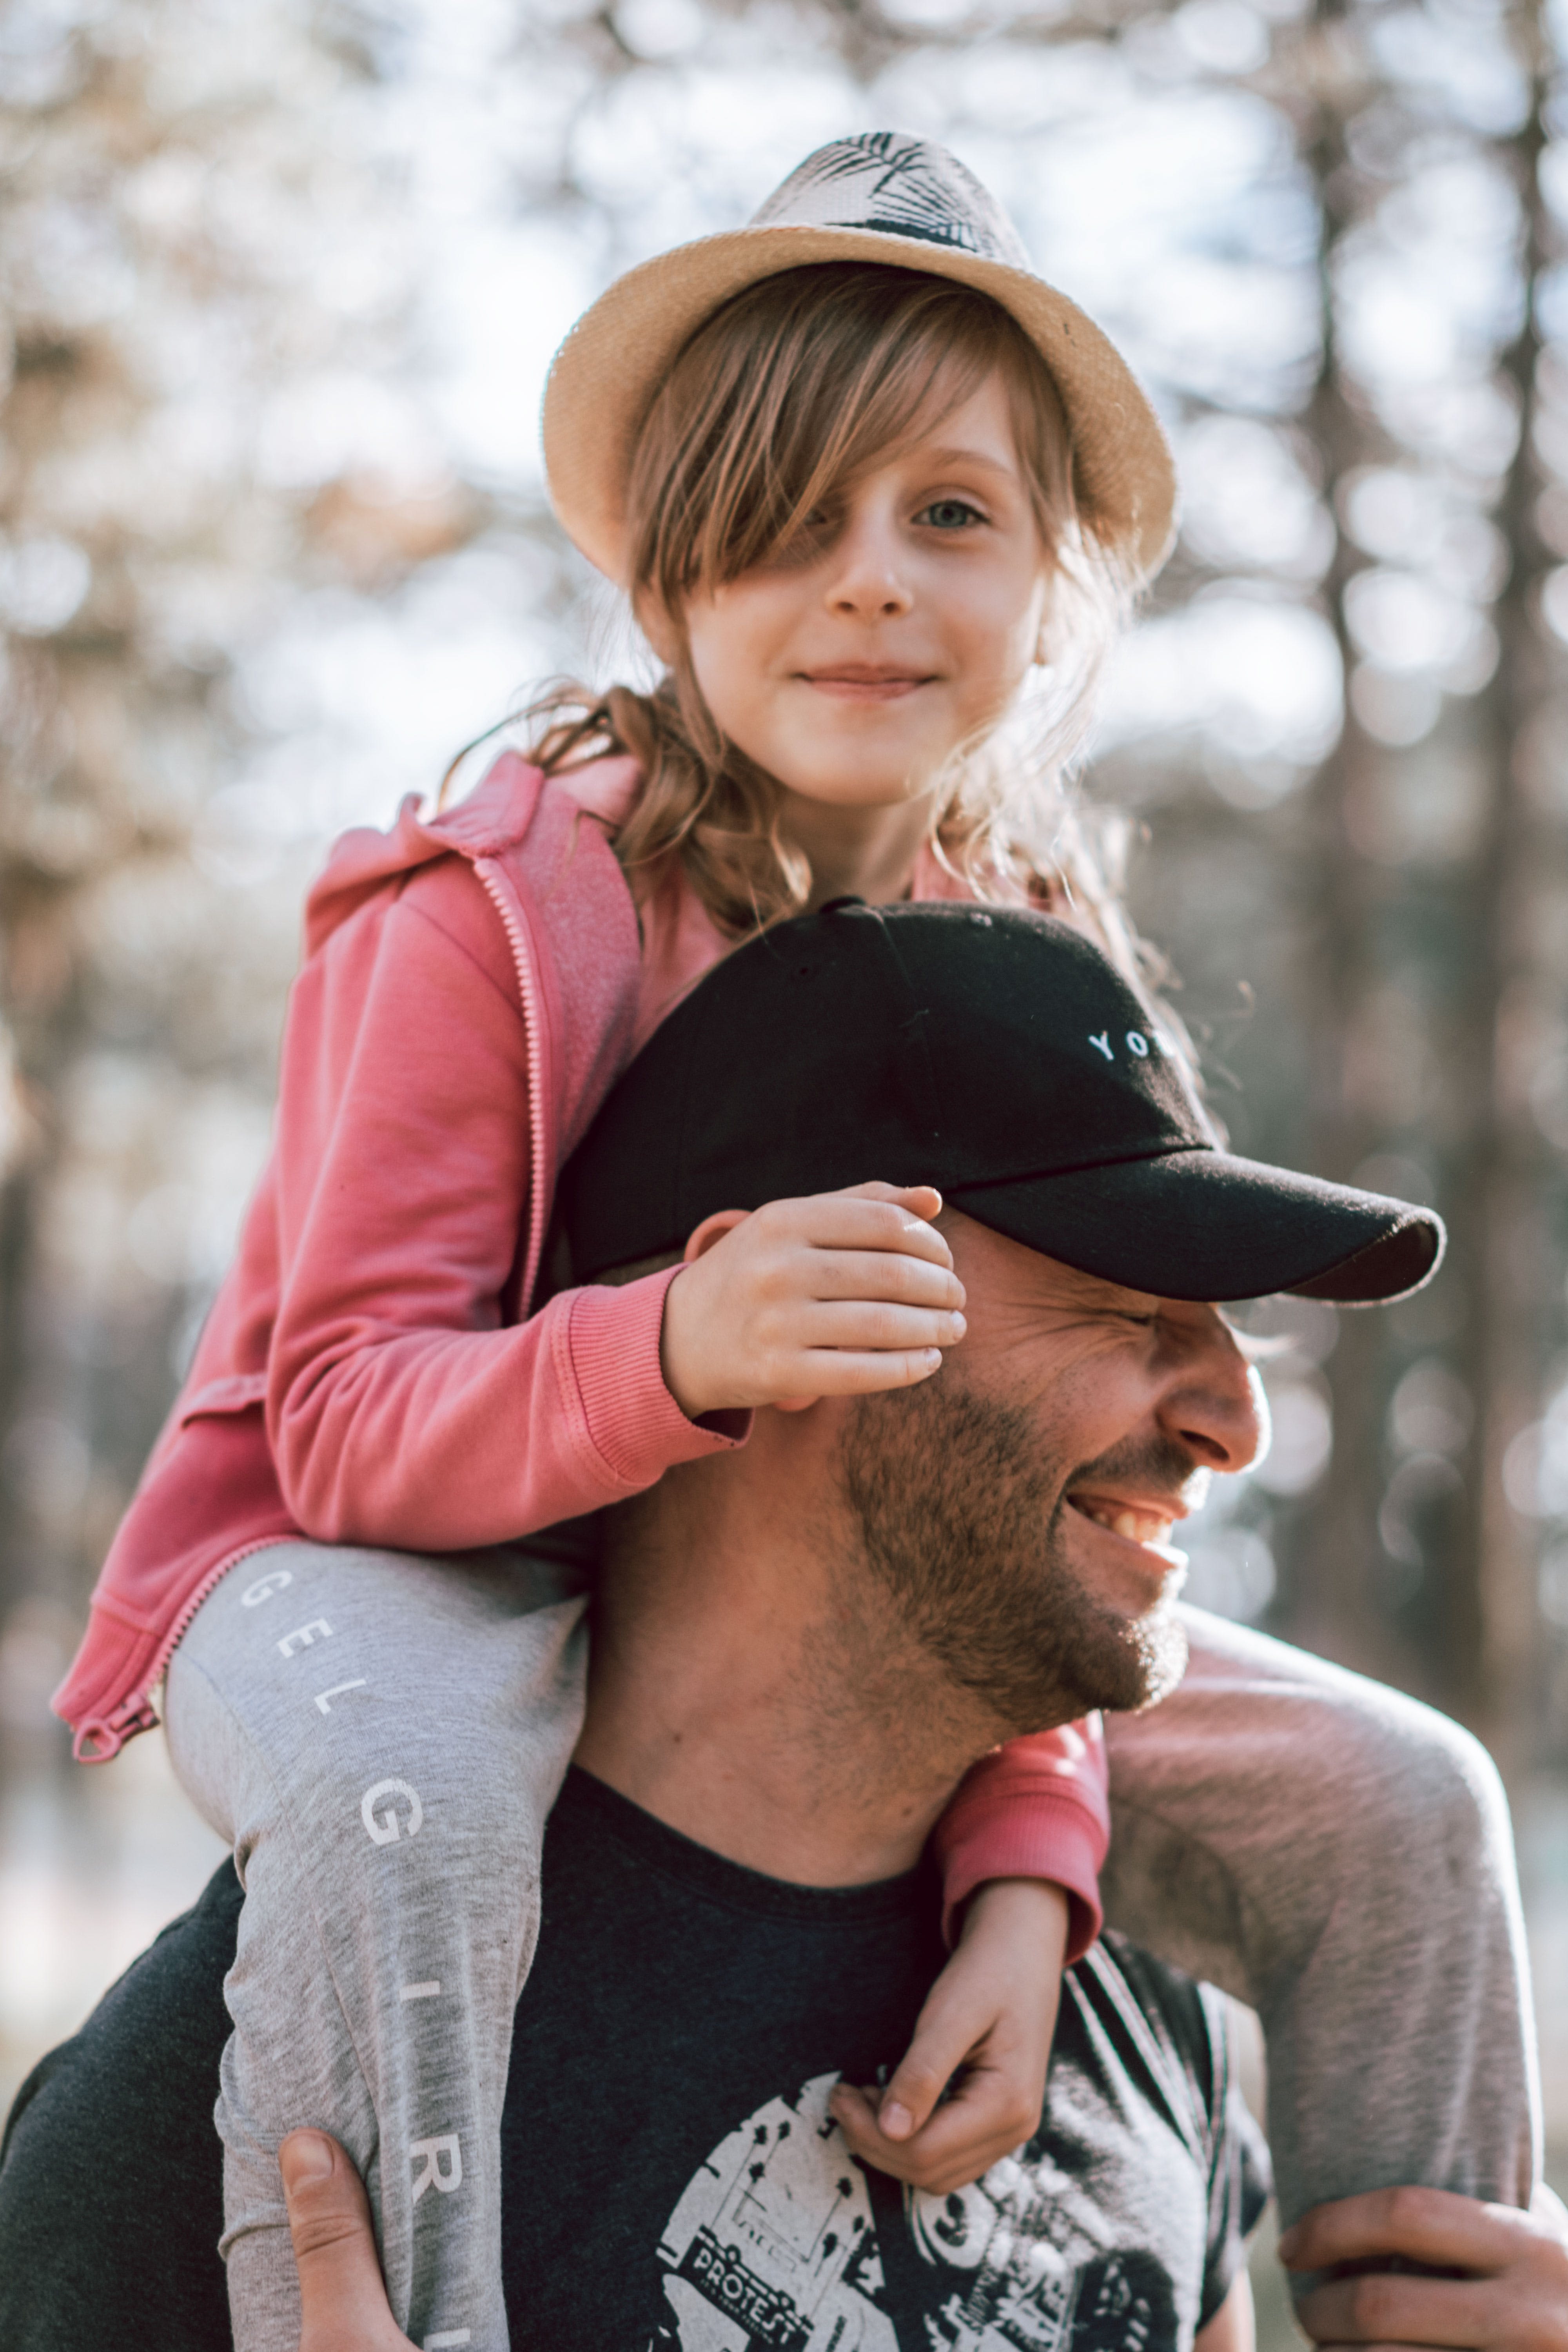 A man bonding with his daughter. | Source: Pexels